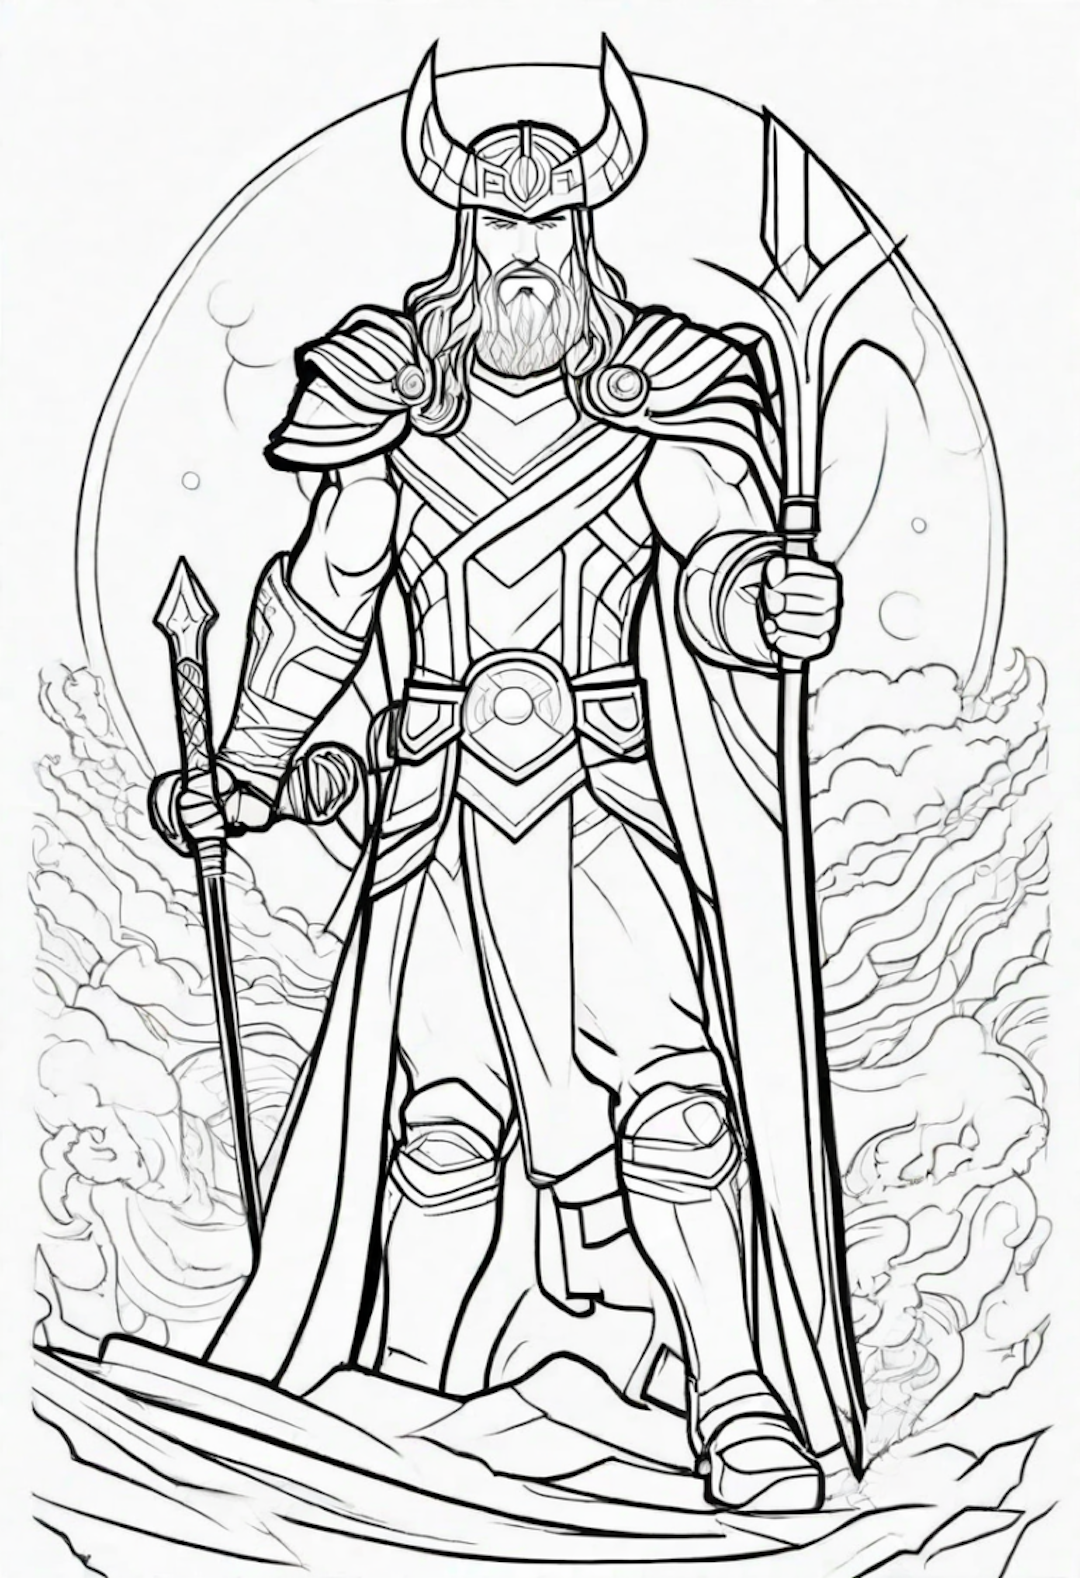 Odin the Allfather: God of Asgard Coloring Page coloring pages